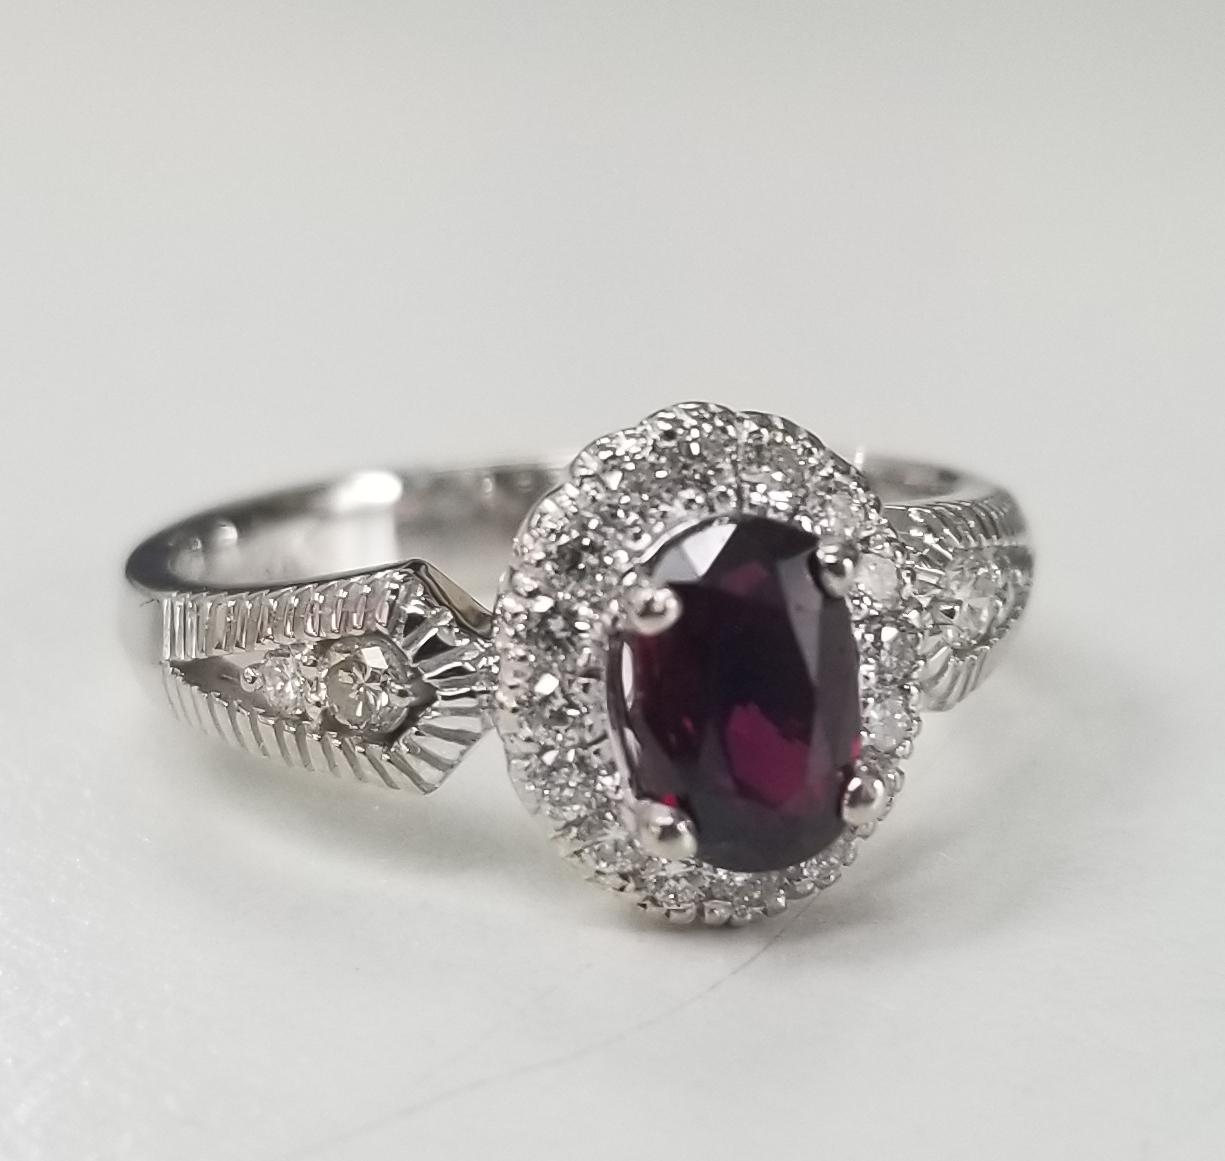 14 karat white gold oval Ruby and diamond halo ring, containing 1 oval ruby of gem quality weighing .83pts.  and 20 round full cut diamonds of very fine quality weighing .35pts.  This ring is a size 6.5 but we will size to fit for free.